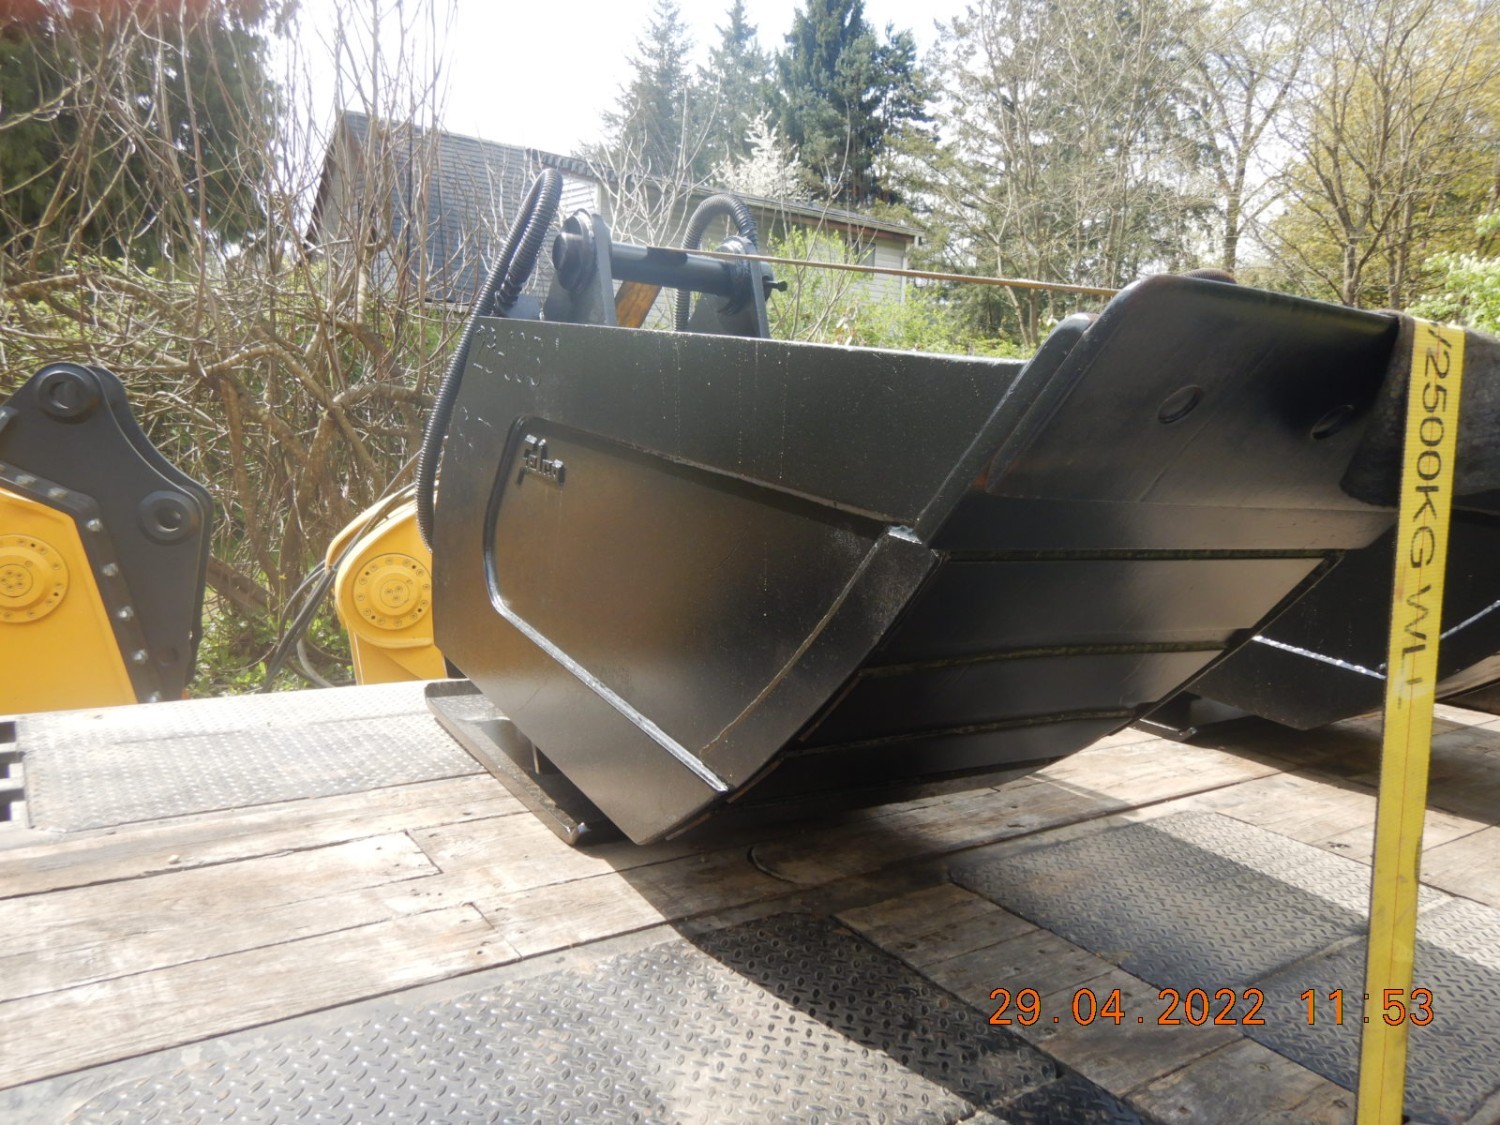 felco-200-350-class-excavator-vibratory-hydraulic-plate-compaction-buckets-as-new-ready-to-work-big-0